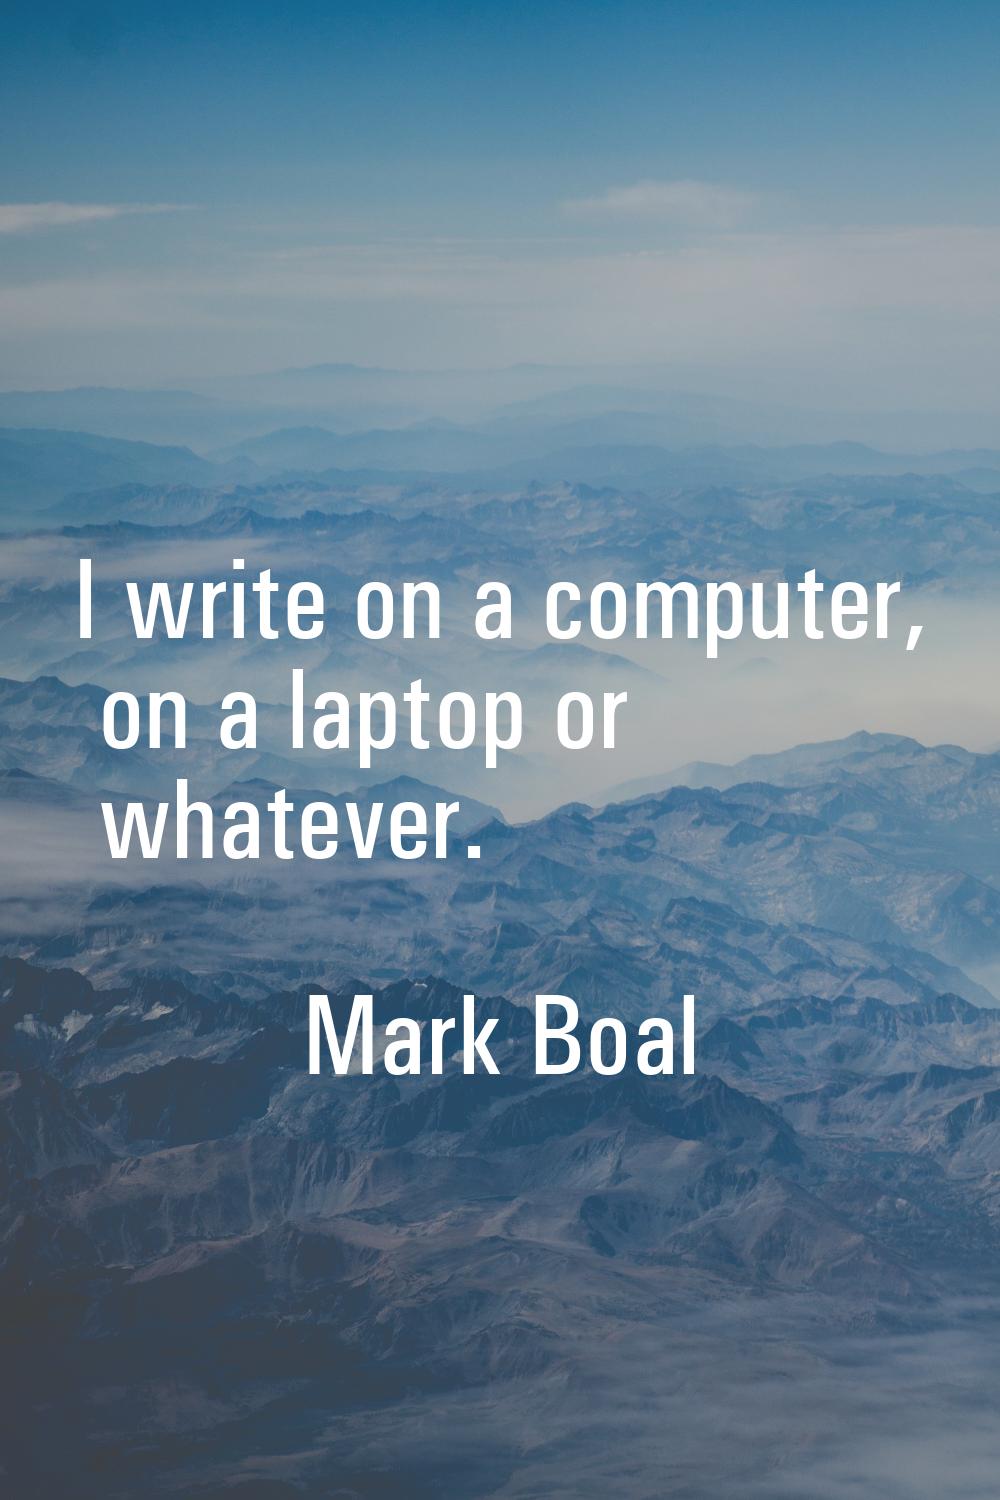 I write on a computer, on a laptop or whatever.